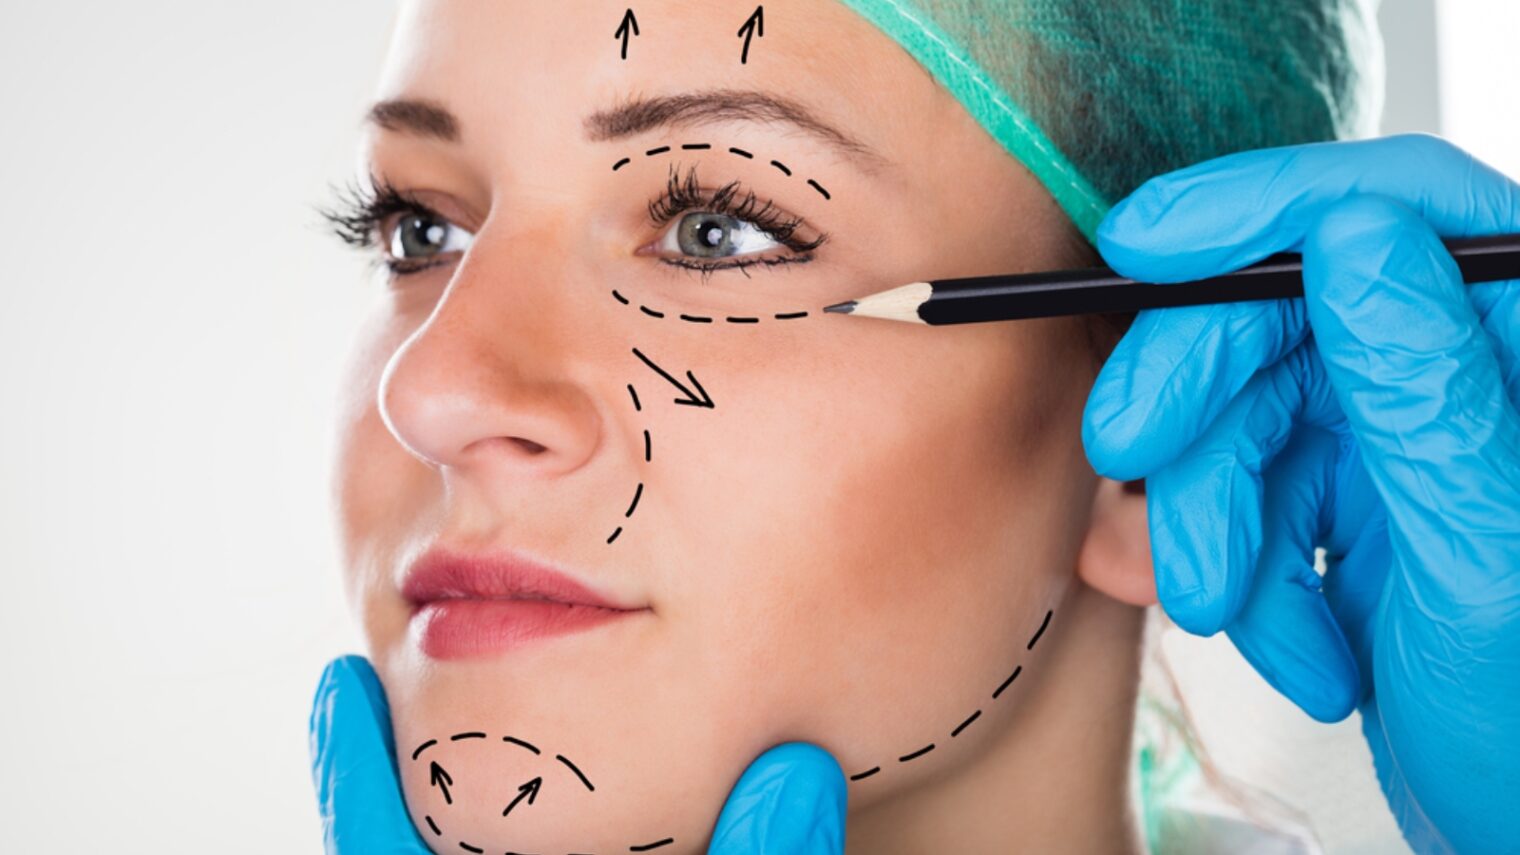 Facelift and scar repair without needles. Illustrative image by Andrey Popov/Shutterstock.com